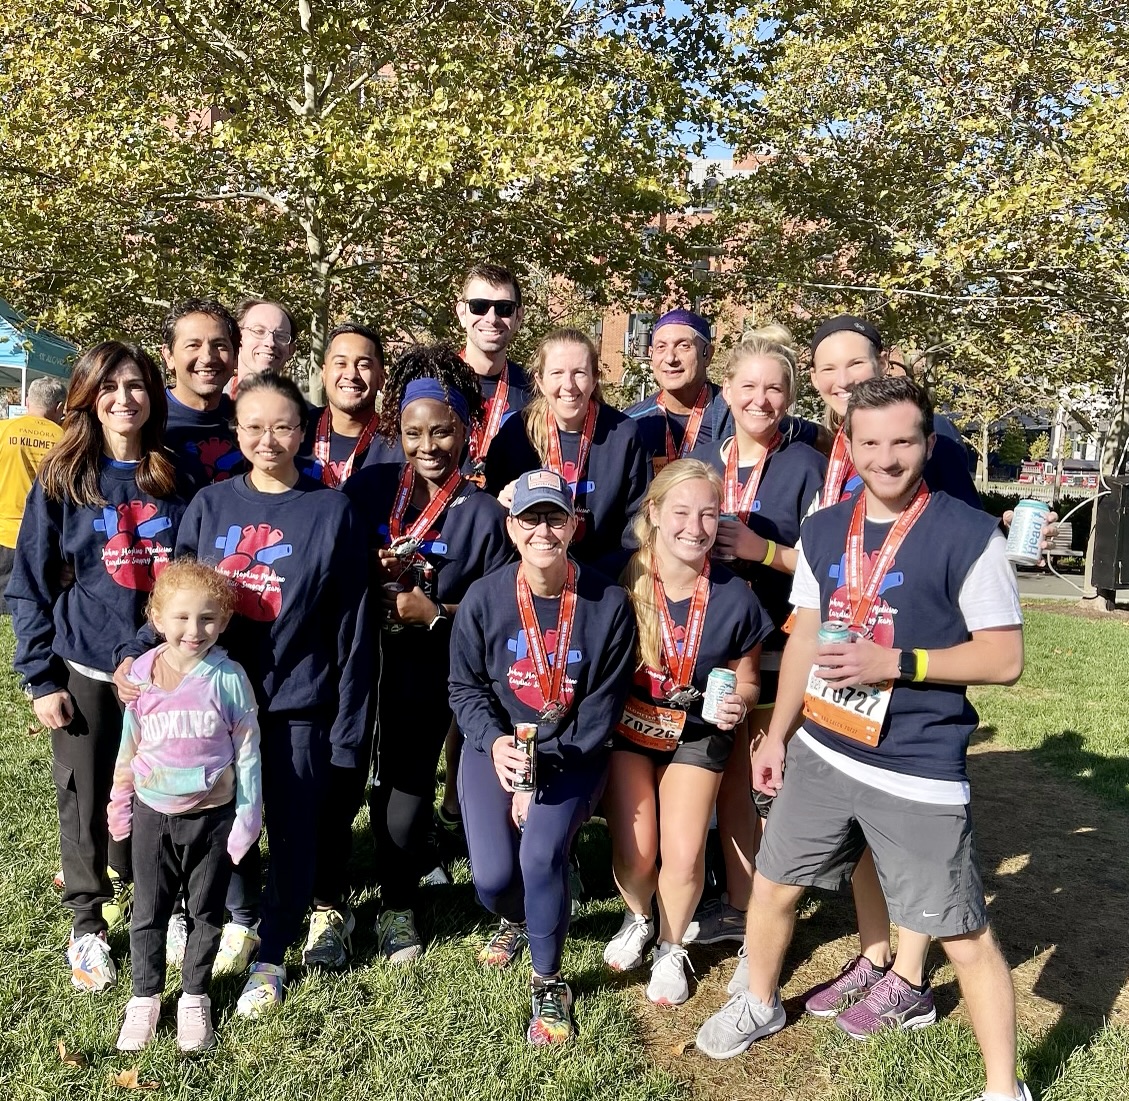 Our Cardiac Surgery team completed the @baltrunfest 10K race this weekend!🏃🏃‍♀️ Thanks to our team members from surgery, anesthesia, perfusion, CVSICU and nursing who joined us! @HopkinsMedicine